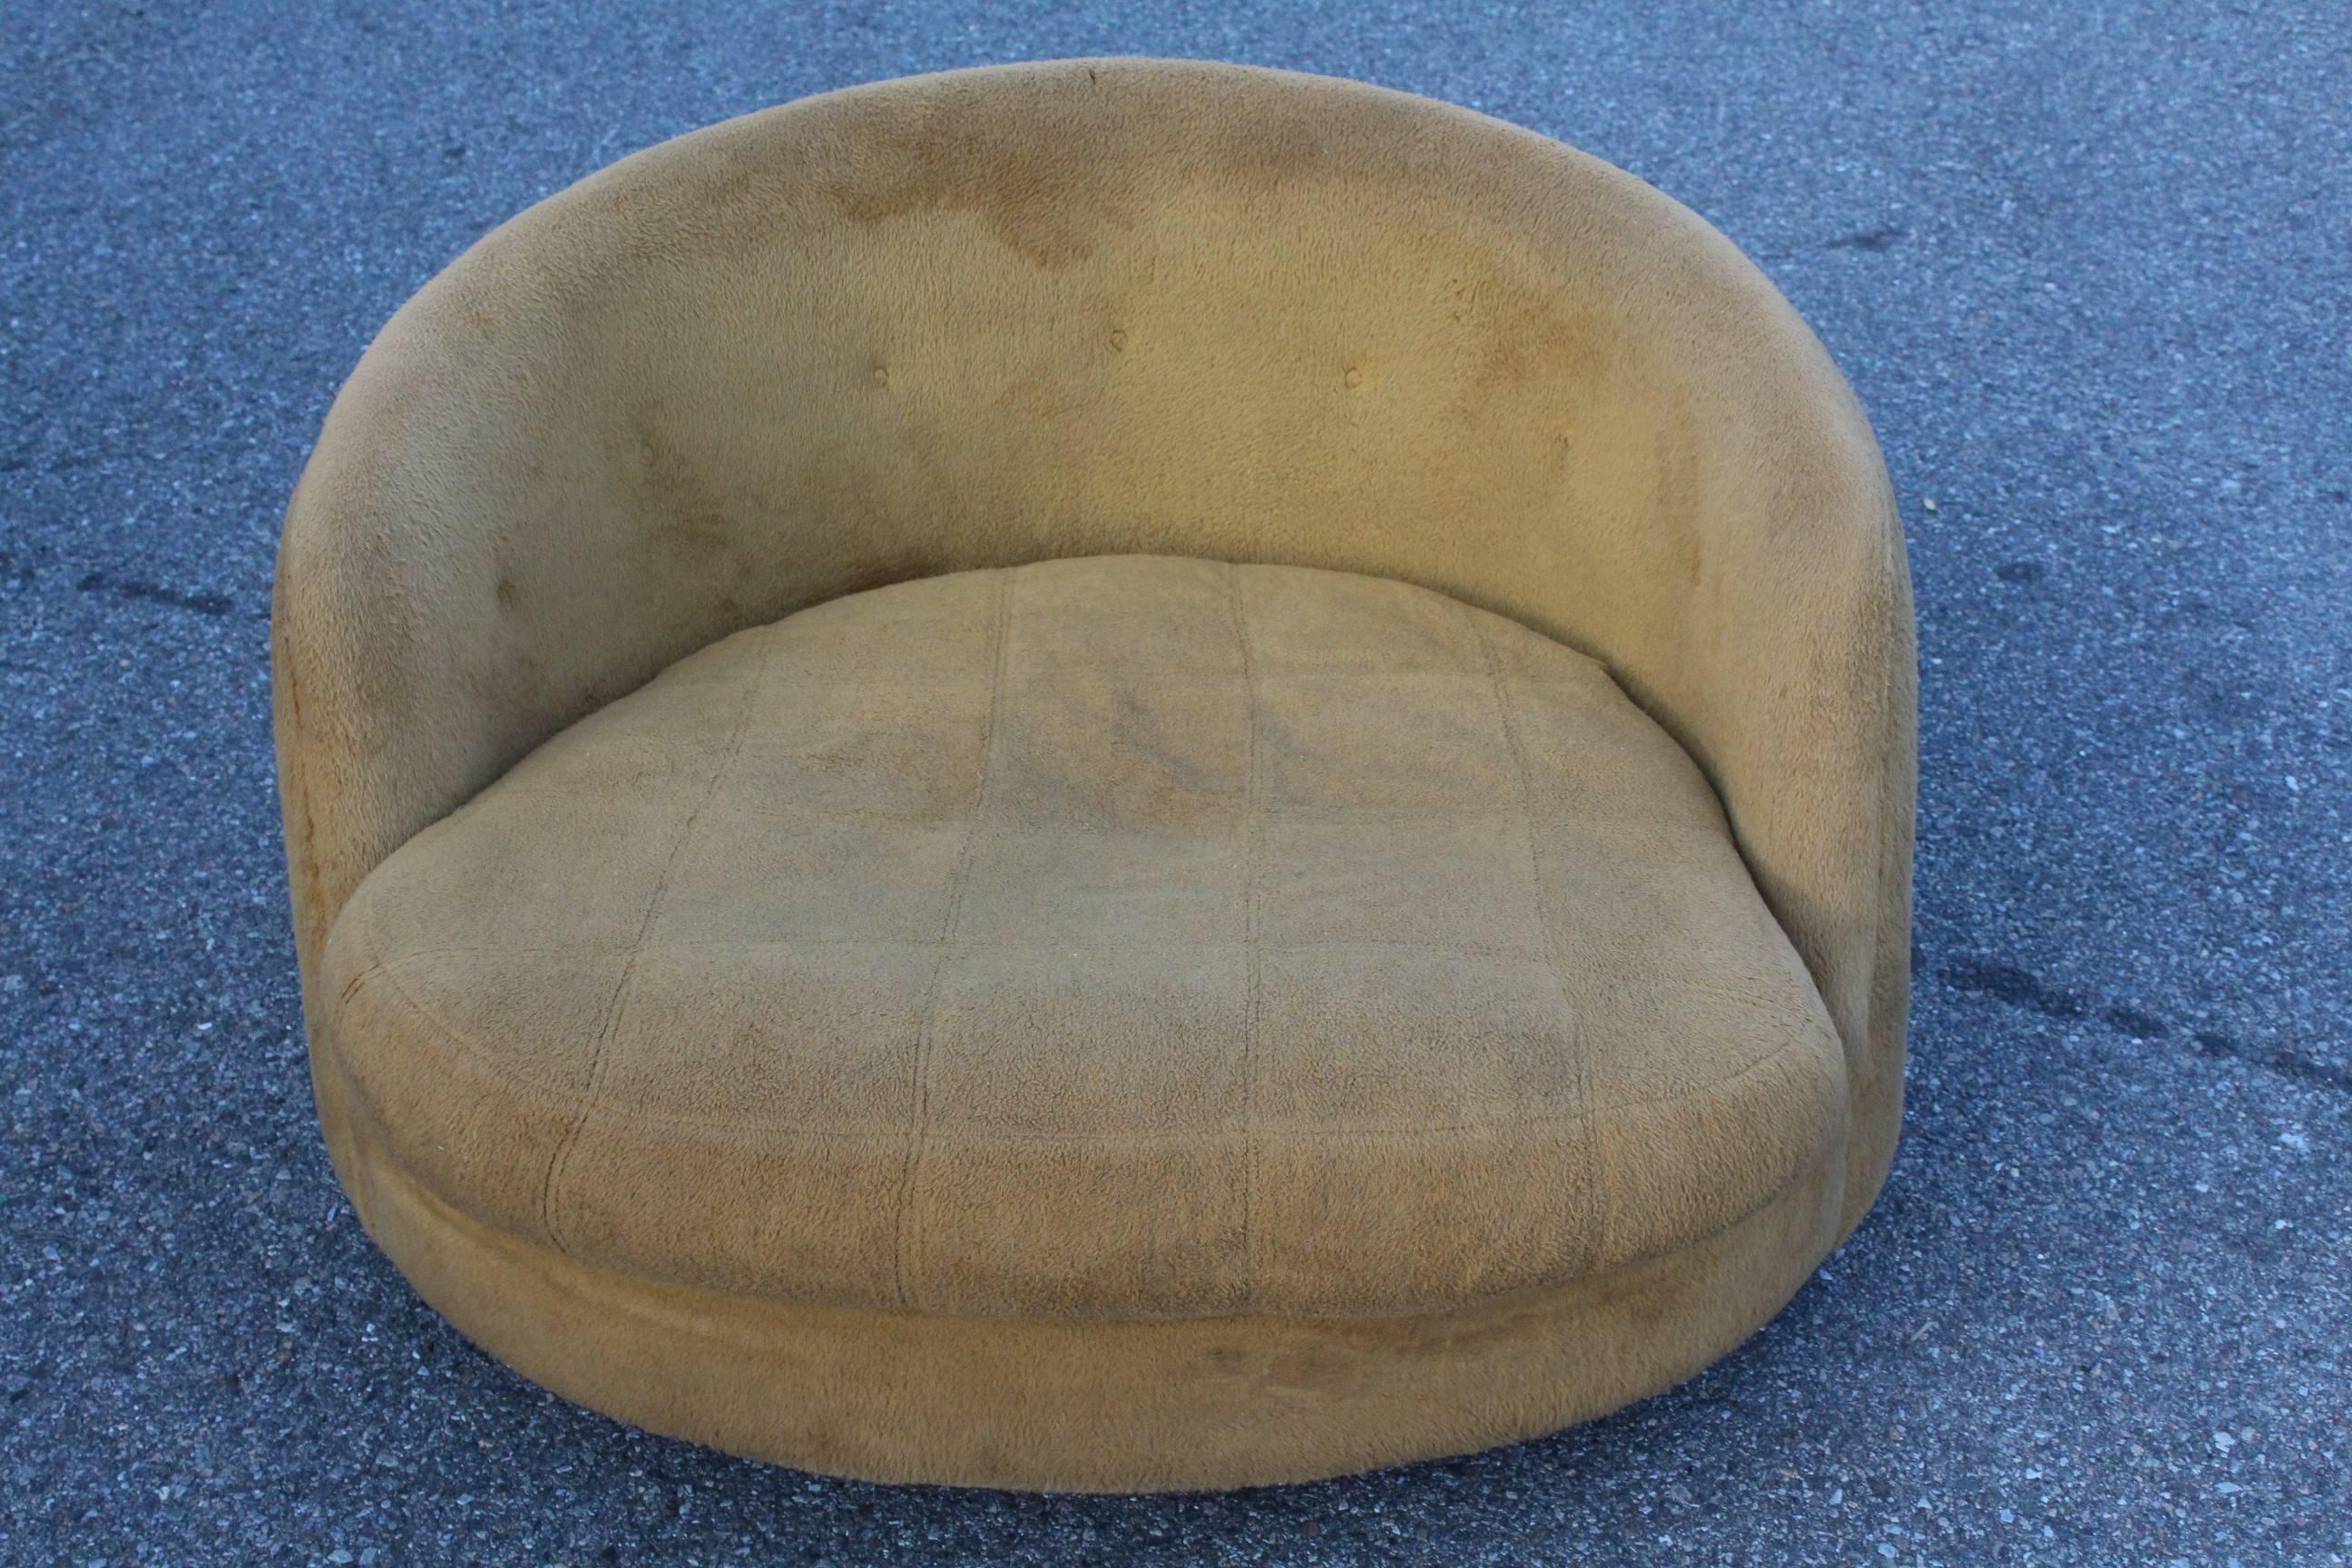 An over-sized vintage lounge chair, designed by Milo Baughman for Thayer Coggin, with round tufted back on plush seat; fixed base does not swivel. Markings include Thayer Coggin manufacturer's label. The chair remains in overall good vintage